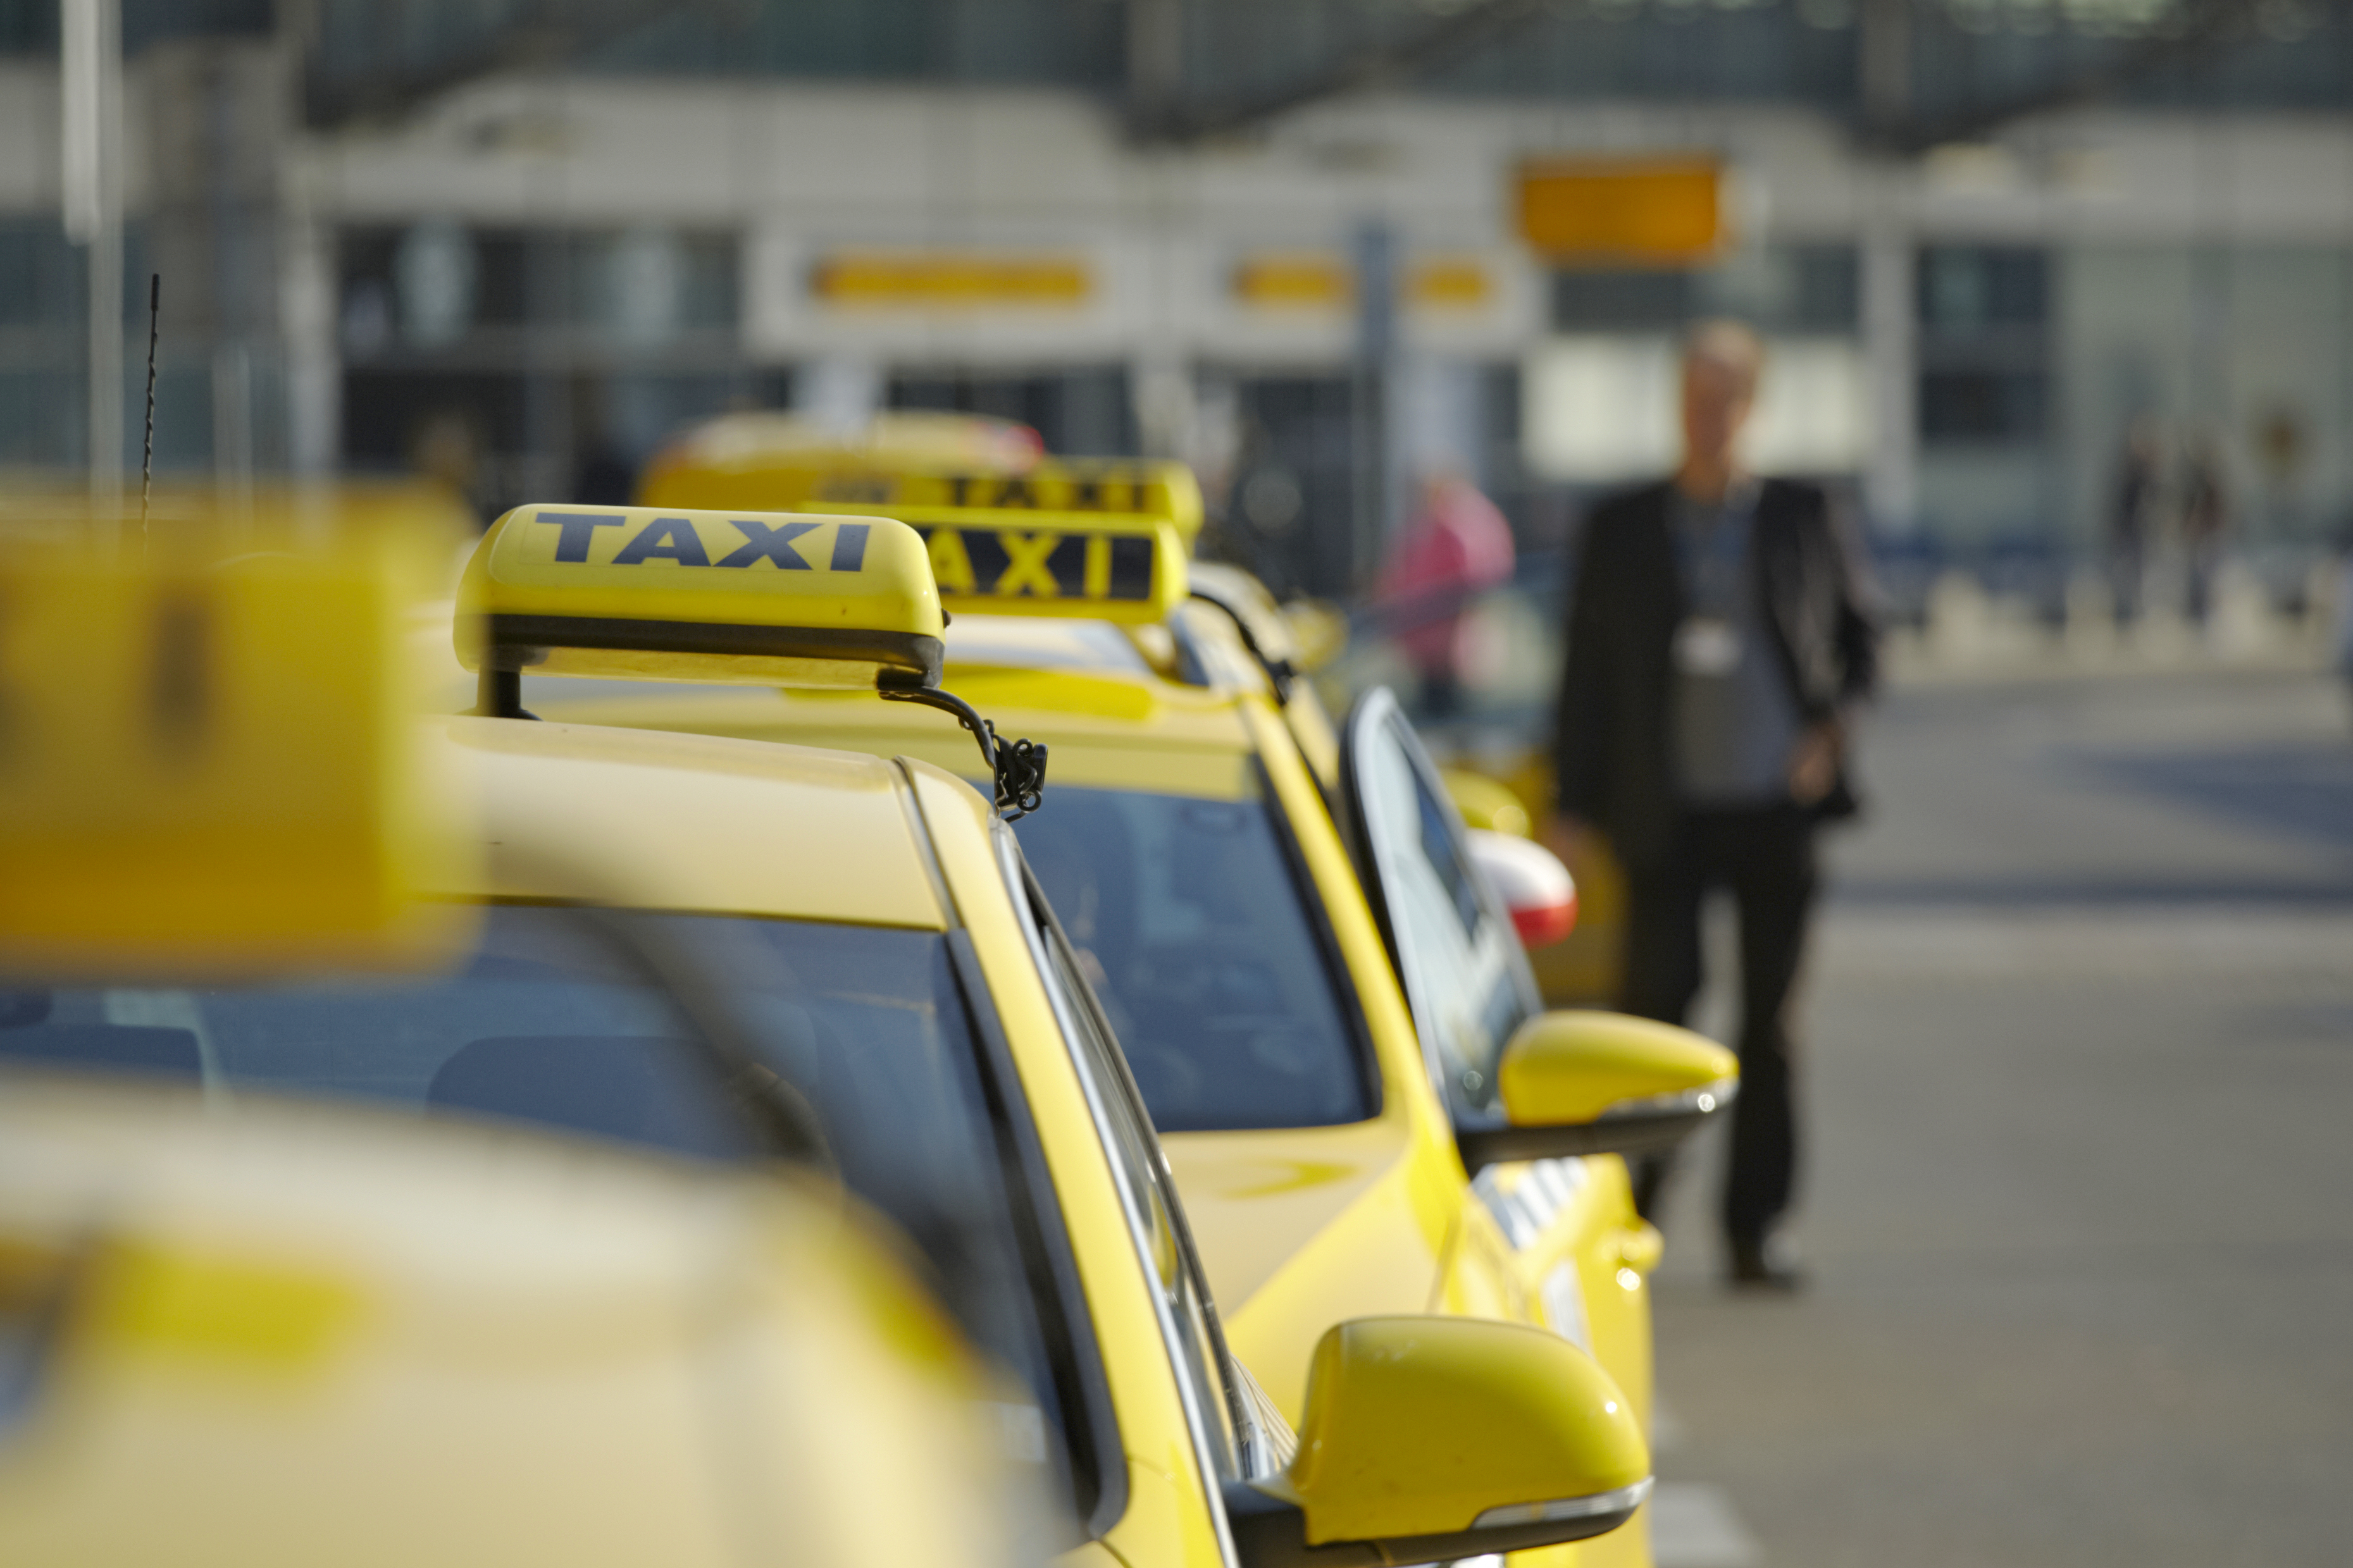 The best taxis in the world - Tips for Choosing the Best Taxi Service When Traveling Abroad